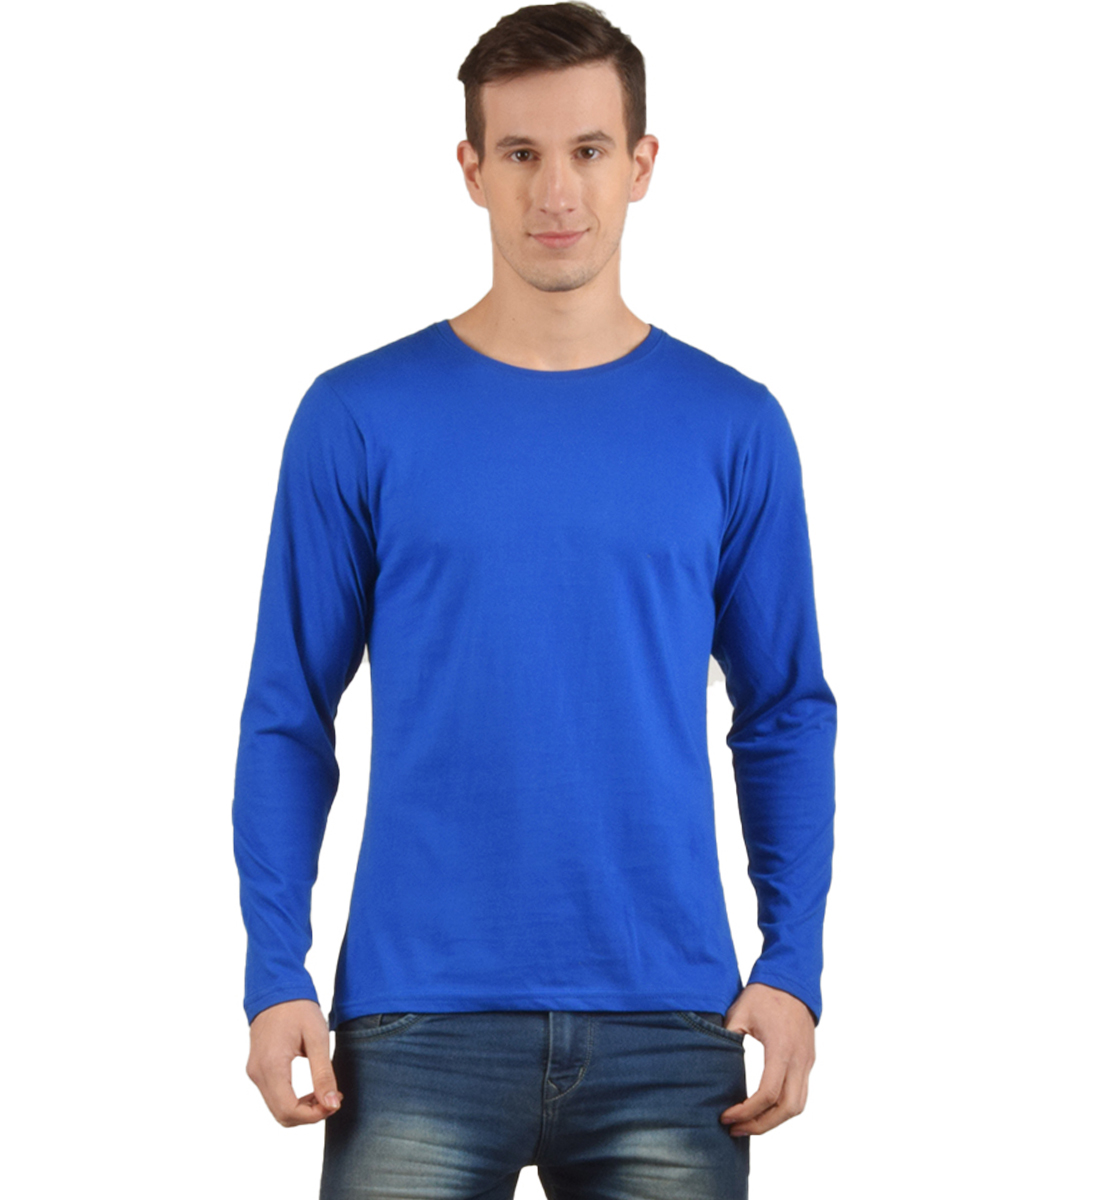 Buy Royal Blue T-Shirt Full Sleeves Round Neck Cotton T-Shirt Online ...